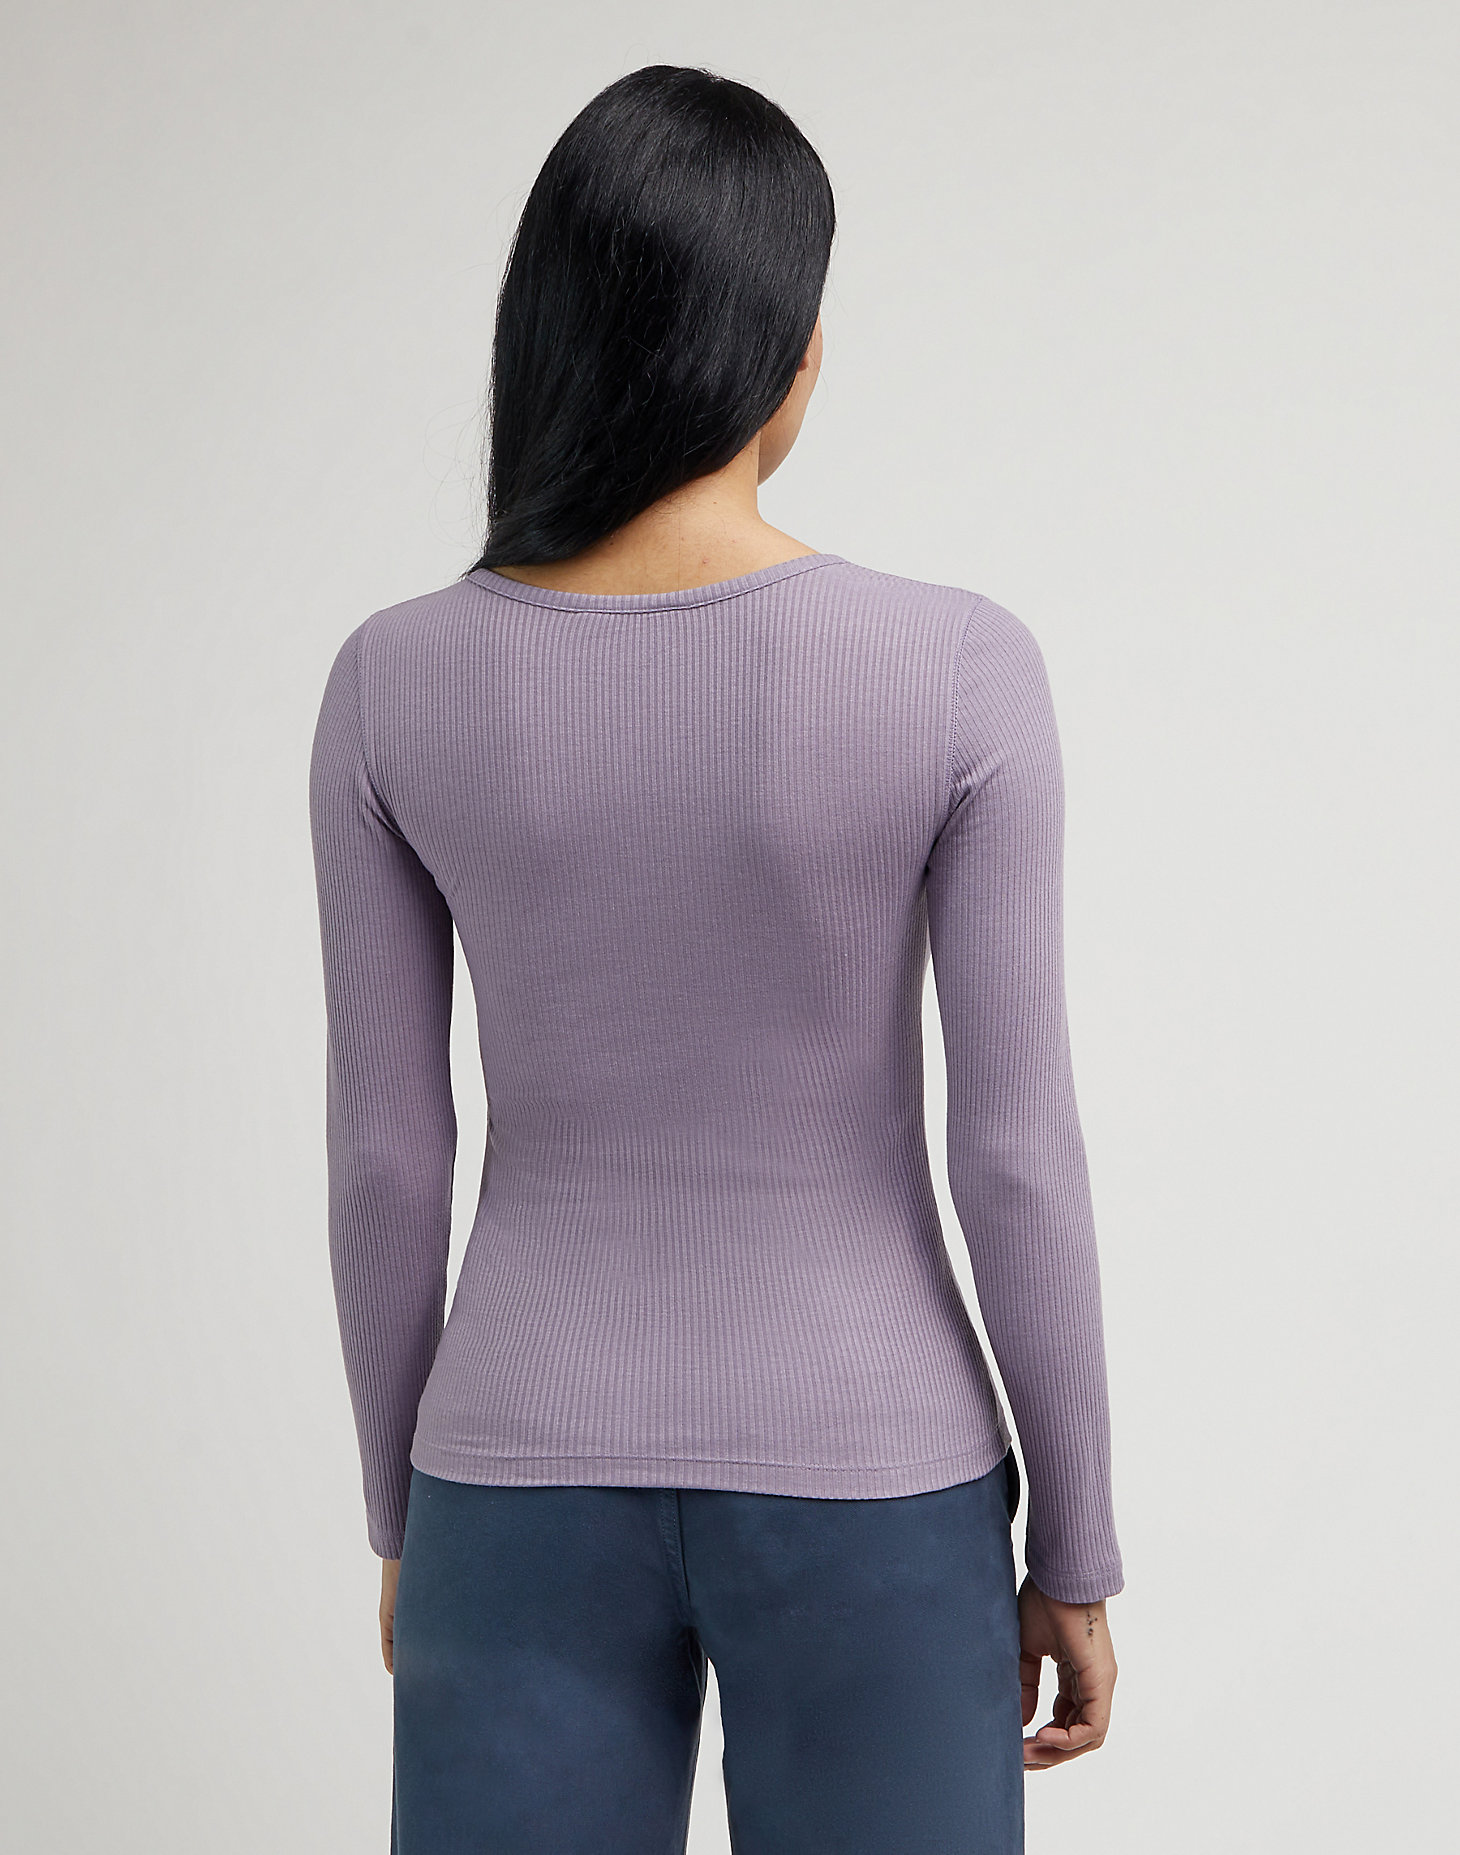 Ribbed Long Sleeve Henley in Jazzy Purple alternative view 1